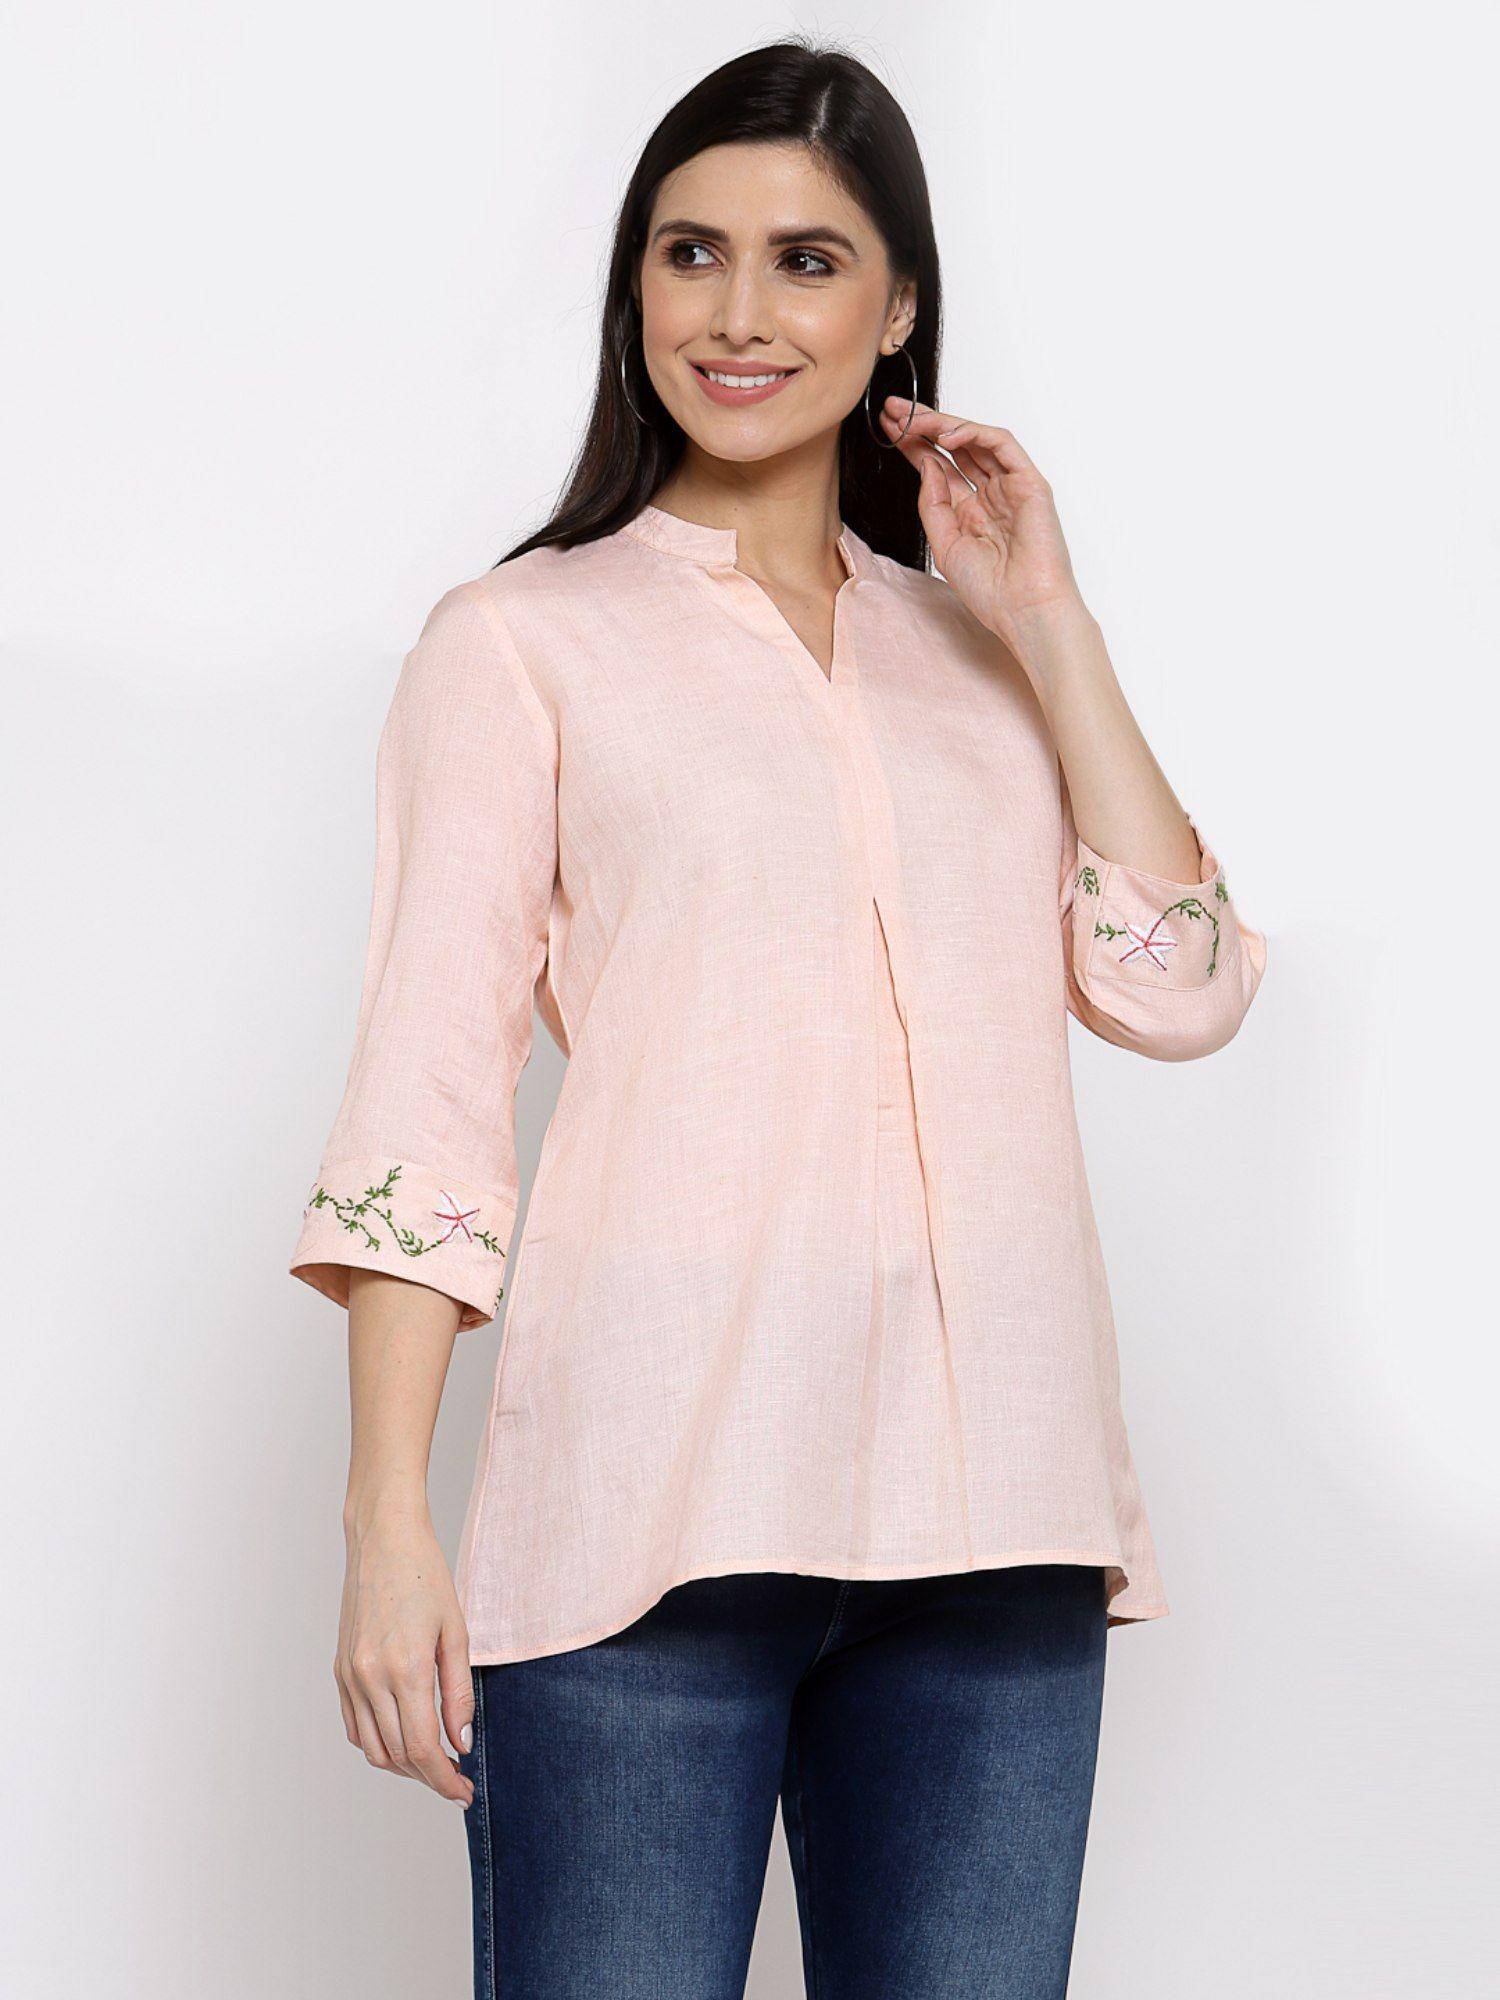 linen top with hand embroidery on it -peach